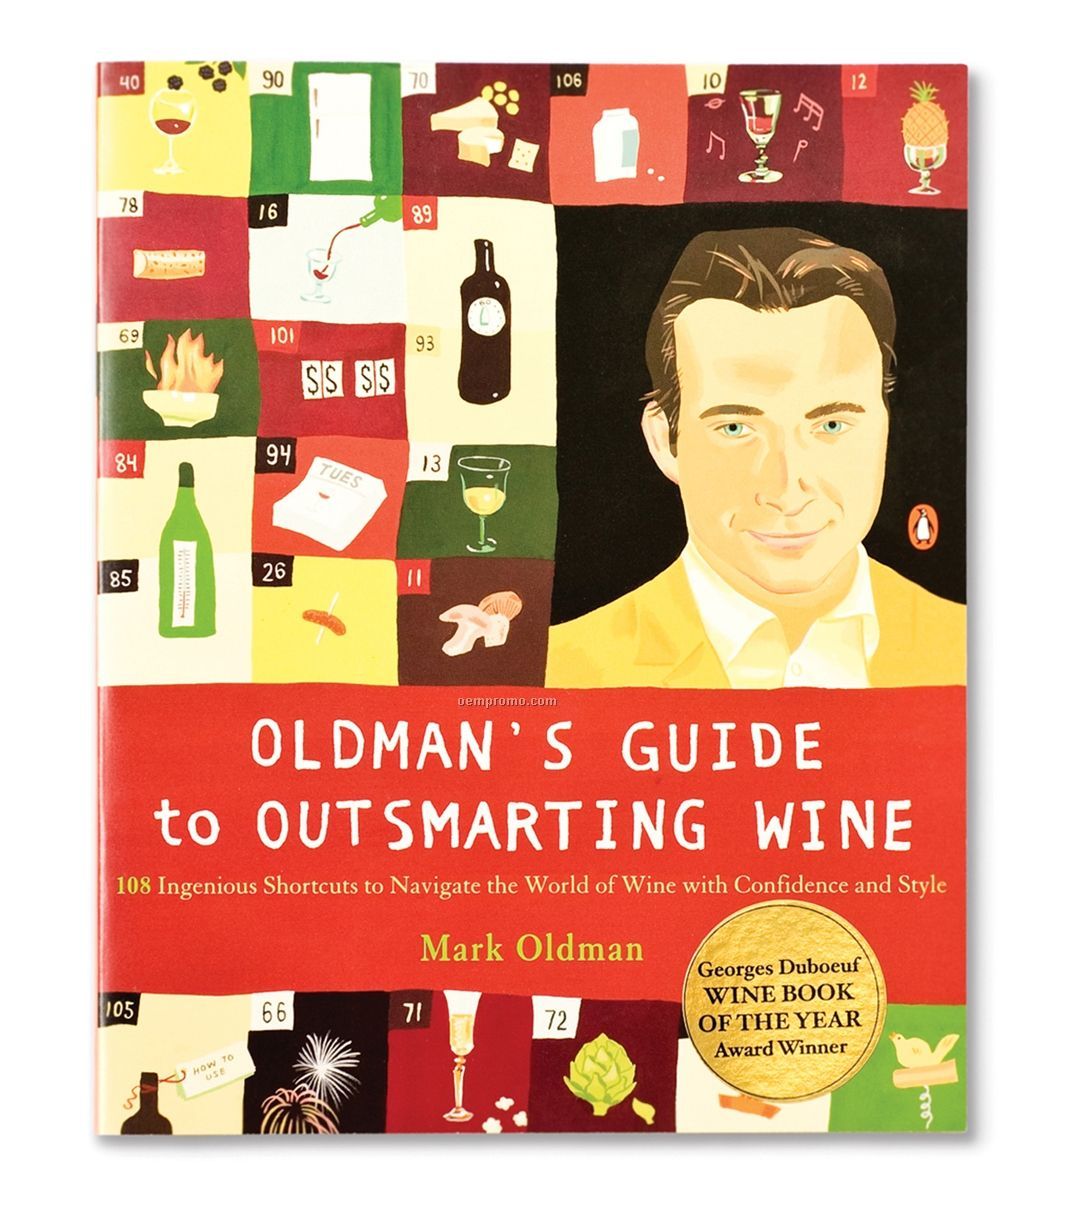 "Oldman's Guide To Outsmarting Wine" By Mark Oldman